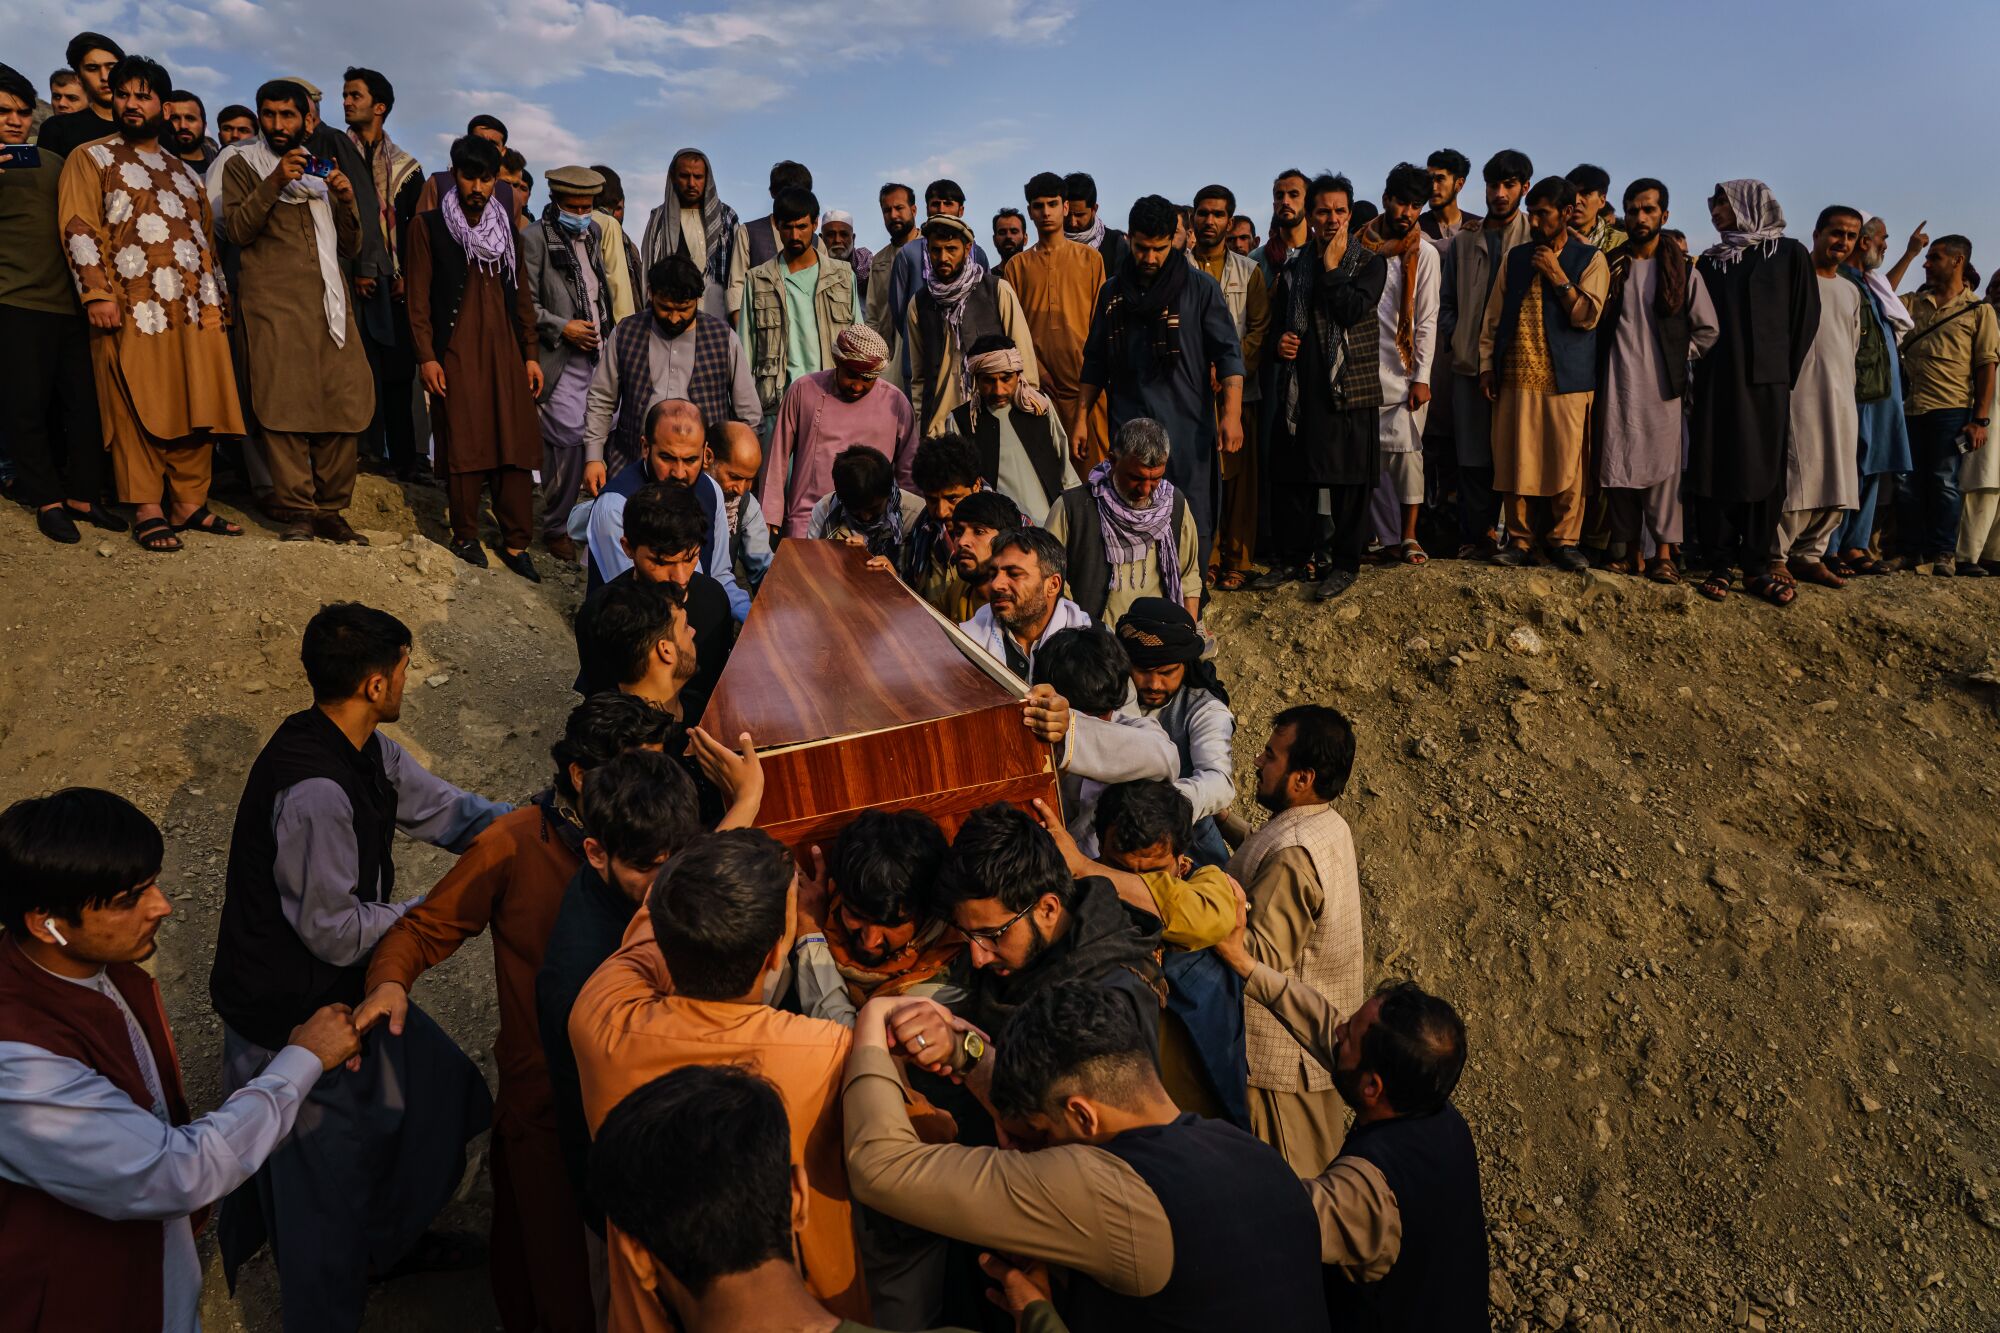 Caskets for the dead are carried toward the gravesite as relatives and friends attend a mass funeral for members of a family.